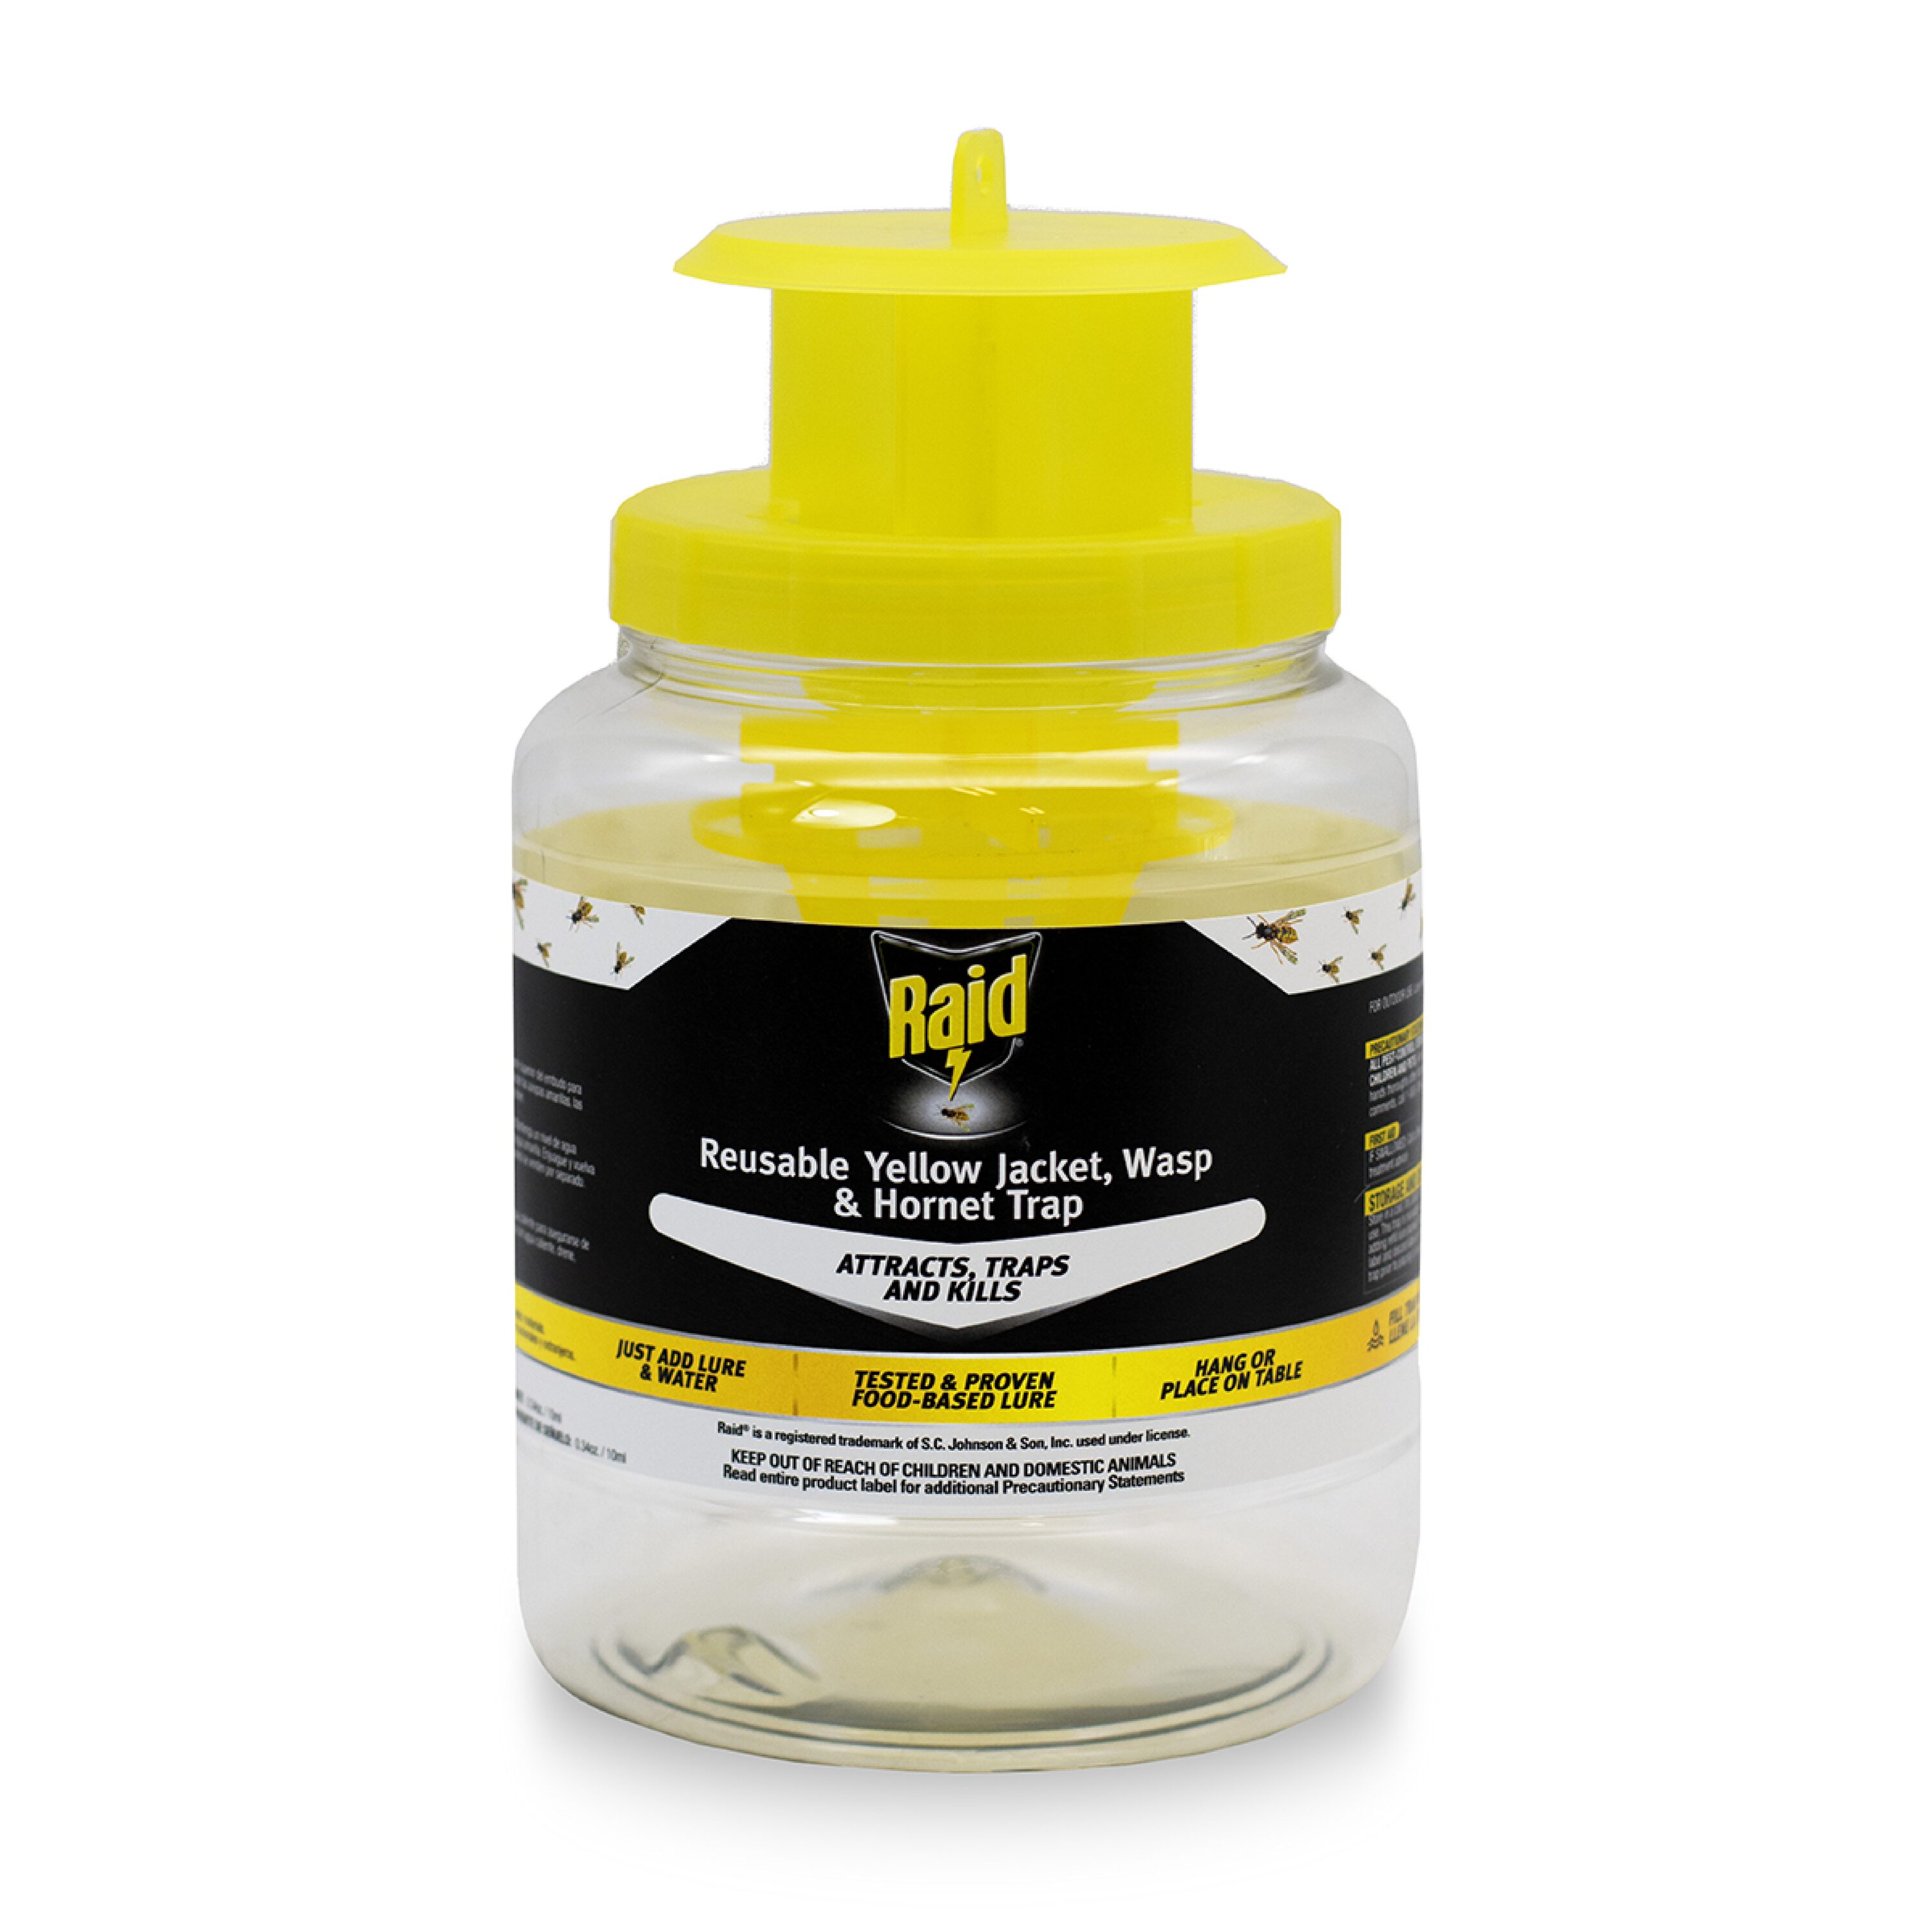 TERRO Wasp and Fly Trap, Stink Free at Tractor Supply Co.